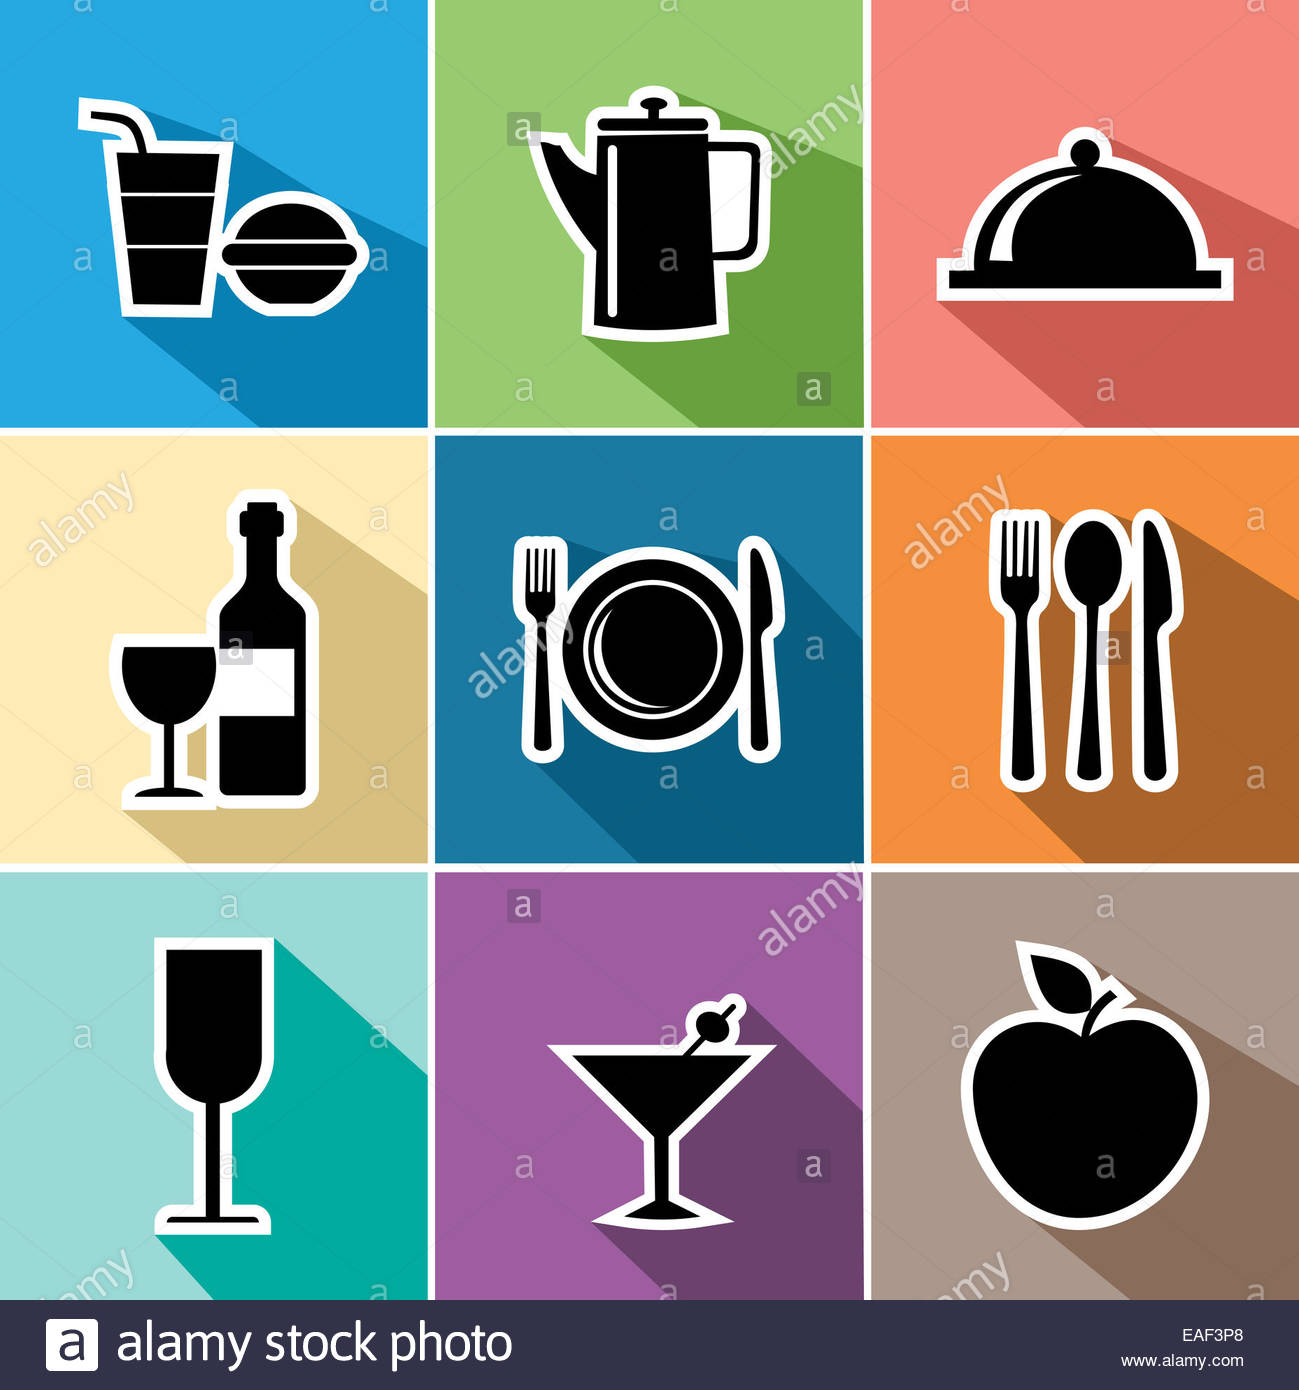 Restaurant Icons - Download 17 Free Restaurant icons here